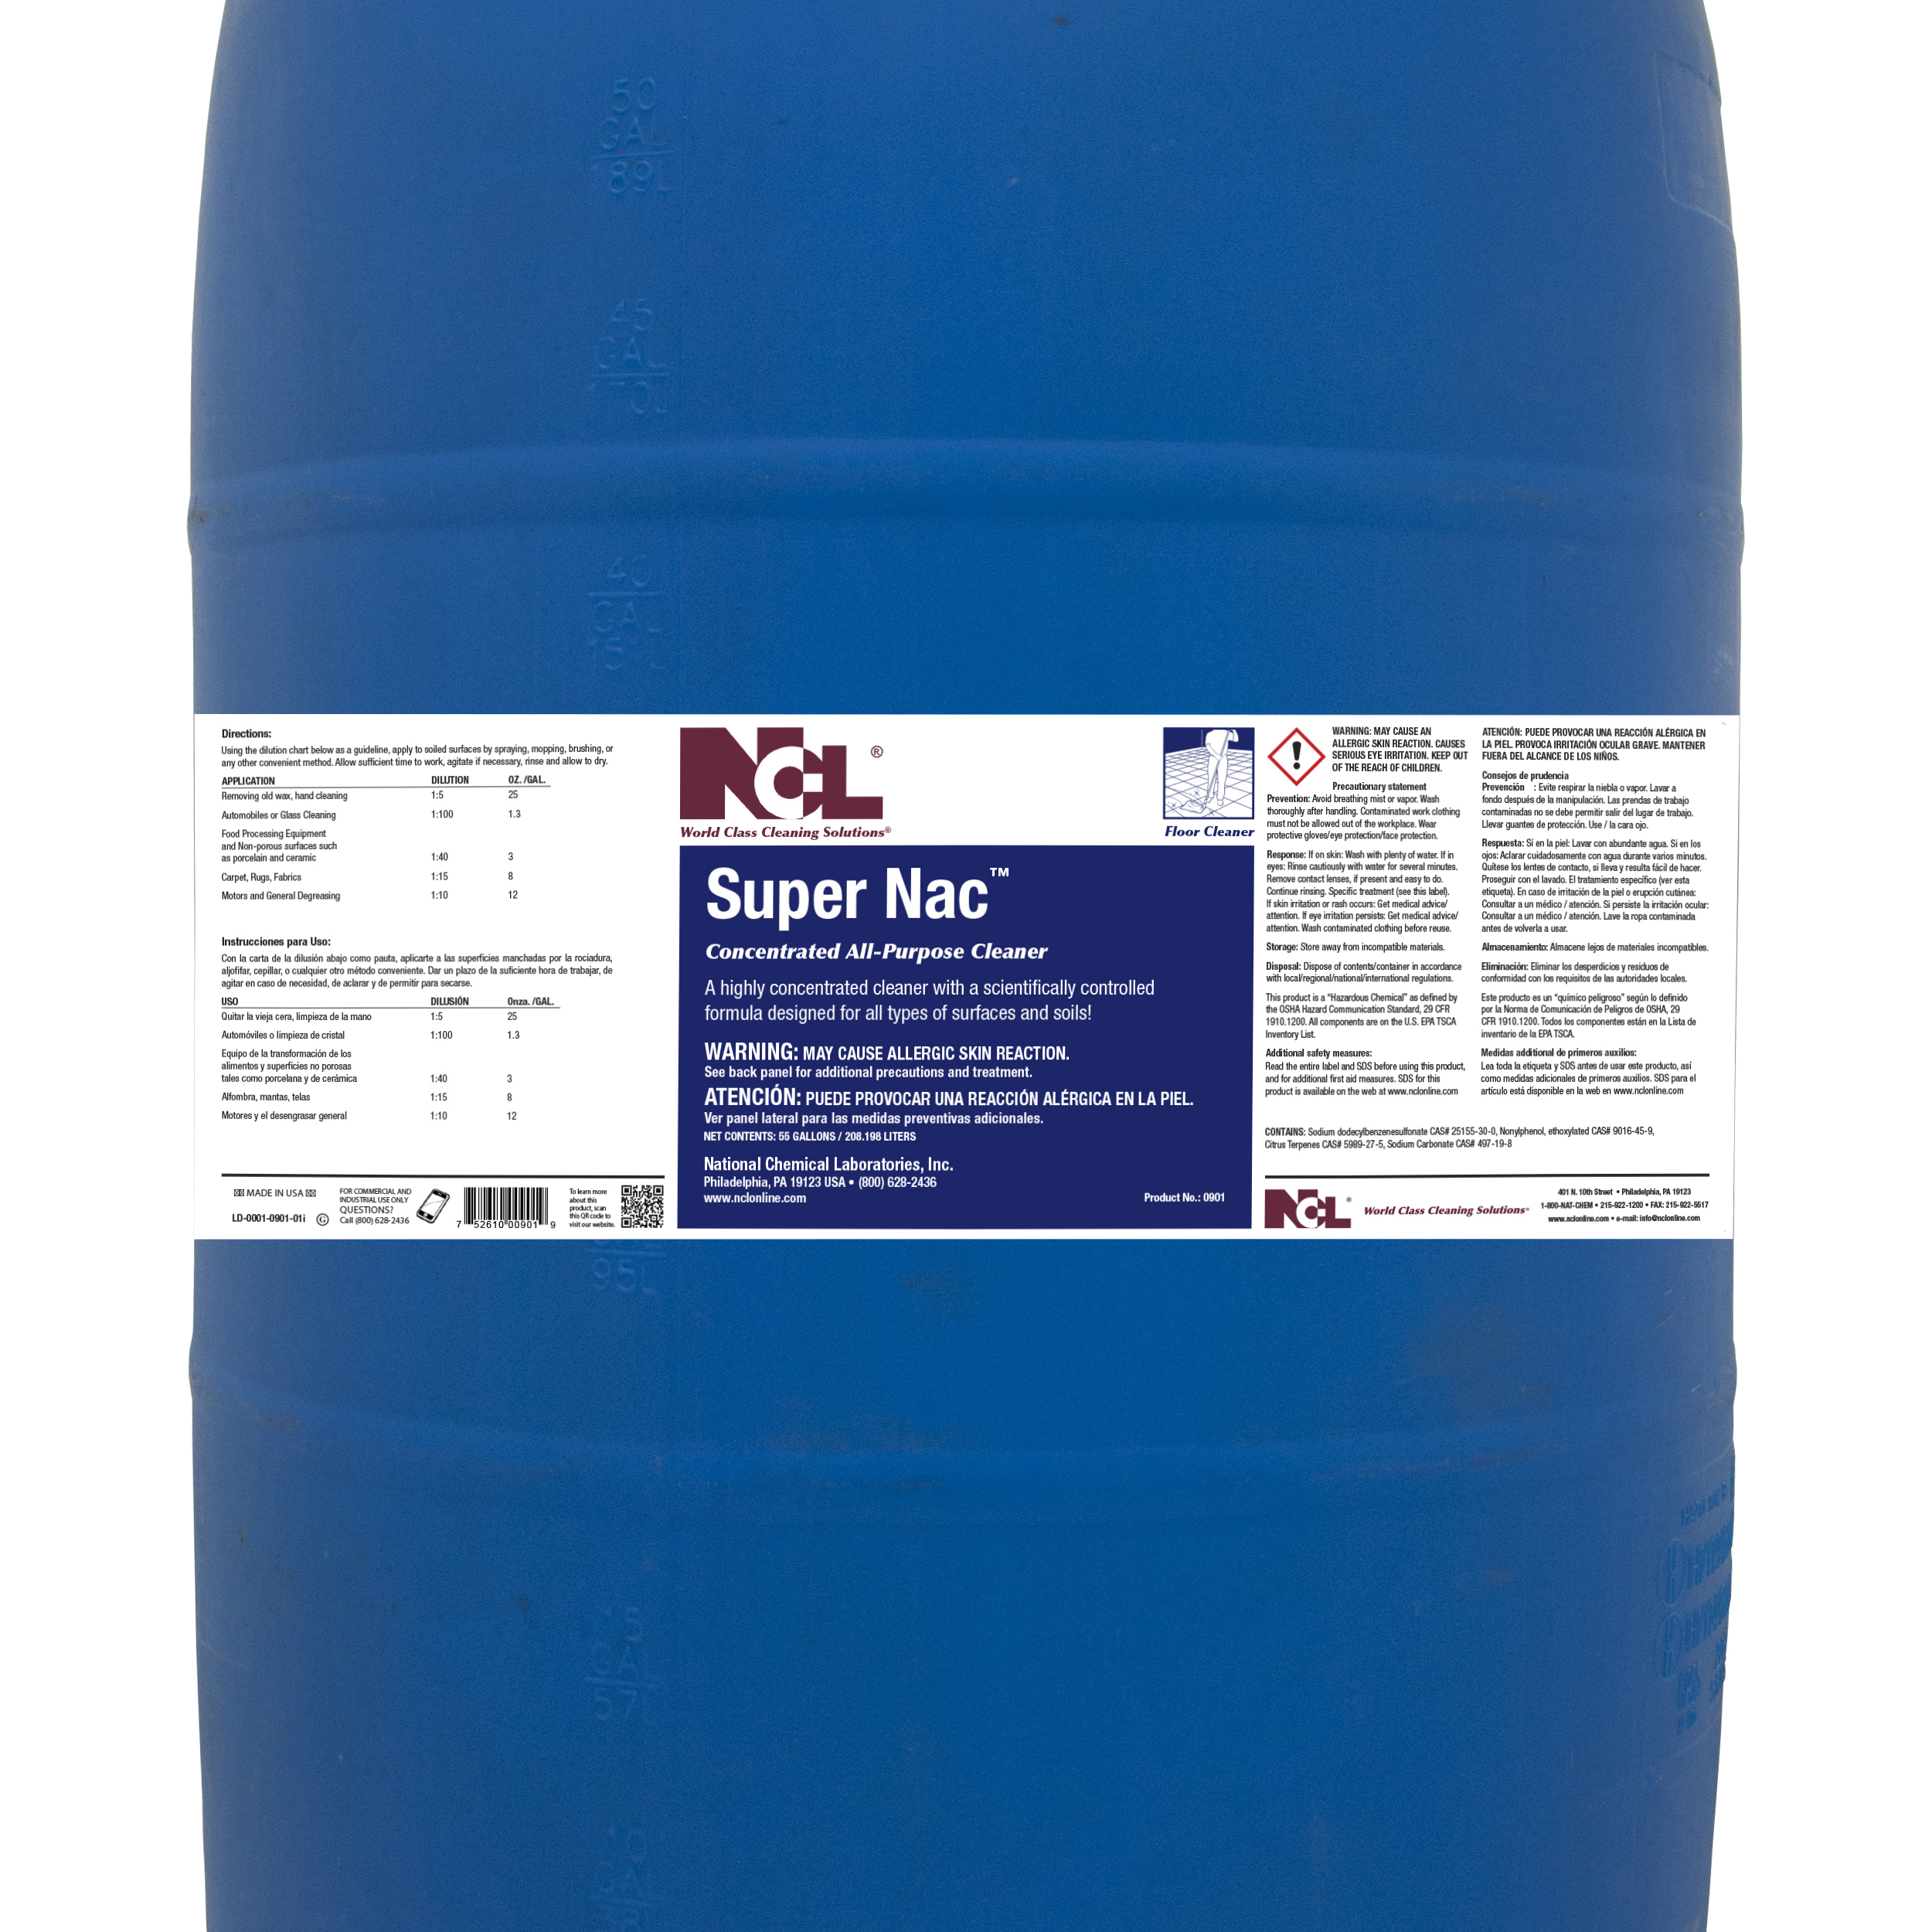  SUPER NAC Concentrated All Purpose Cleaner 55 Gallon Drum (NCL0901-18) 